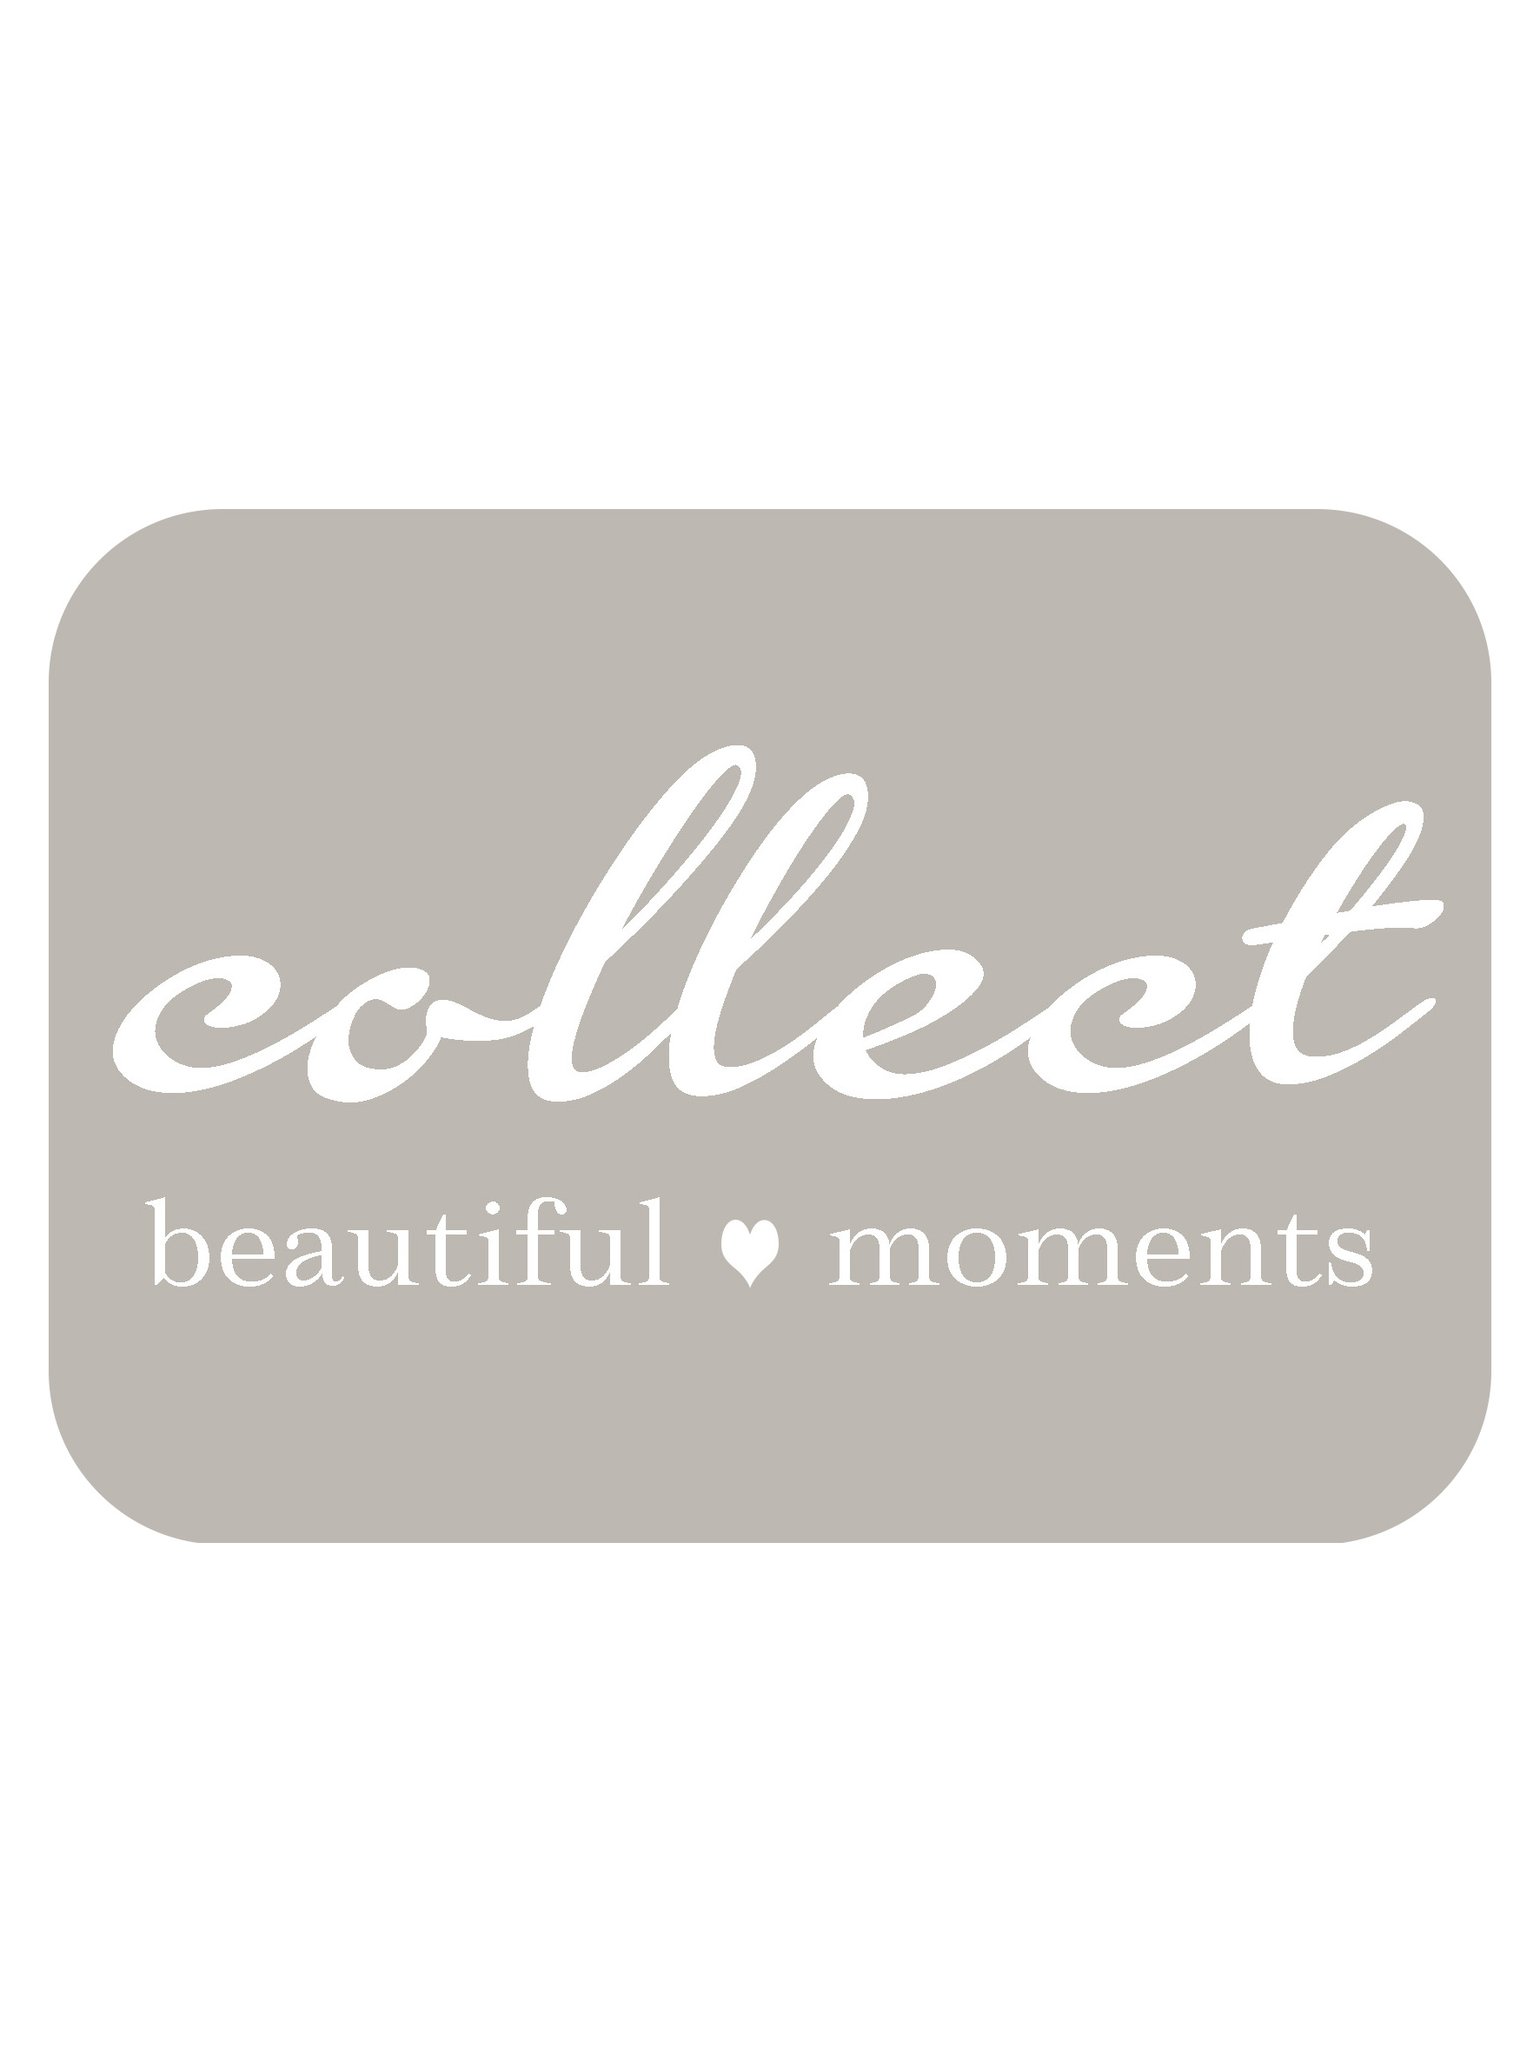 Image of Carte postale "COLLECT BEAUTIFUL MOMENTS"